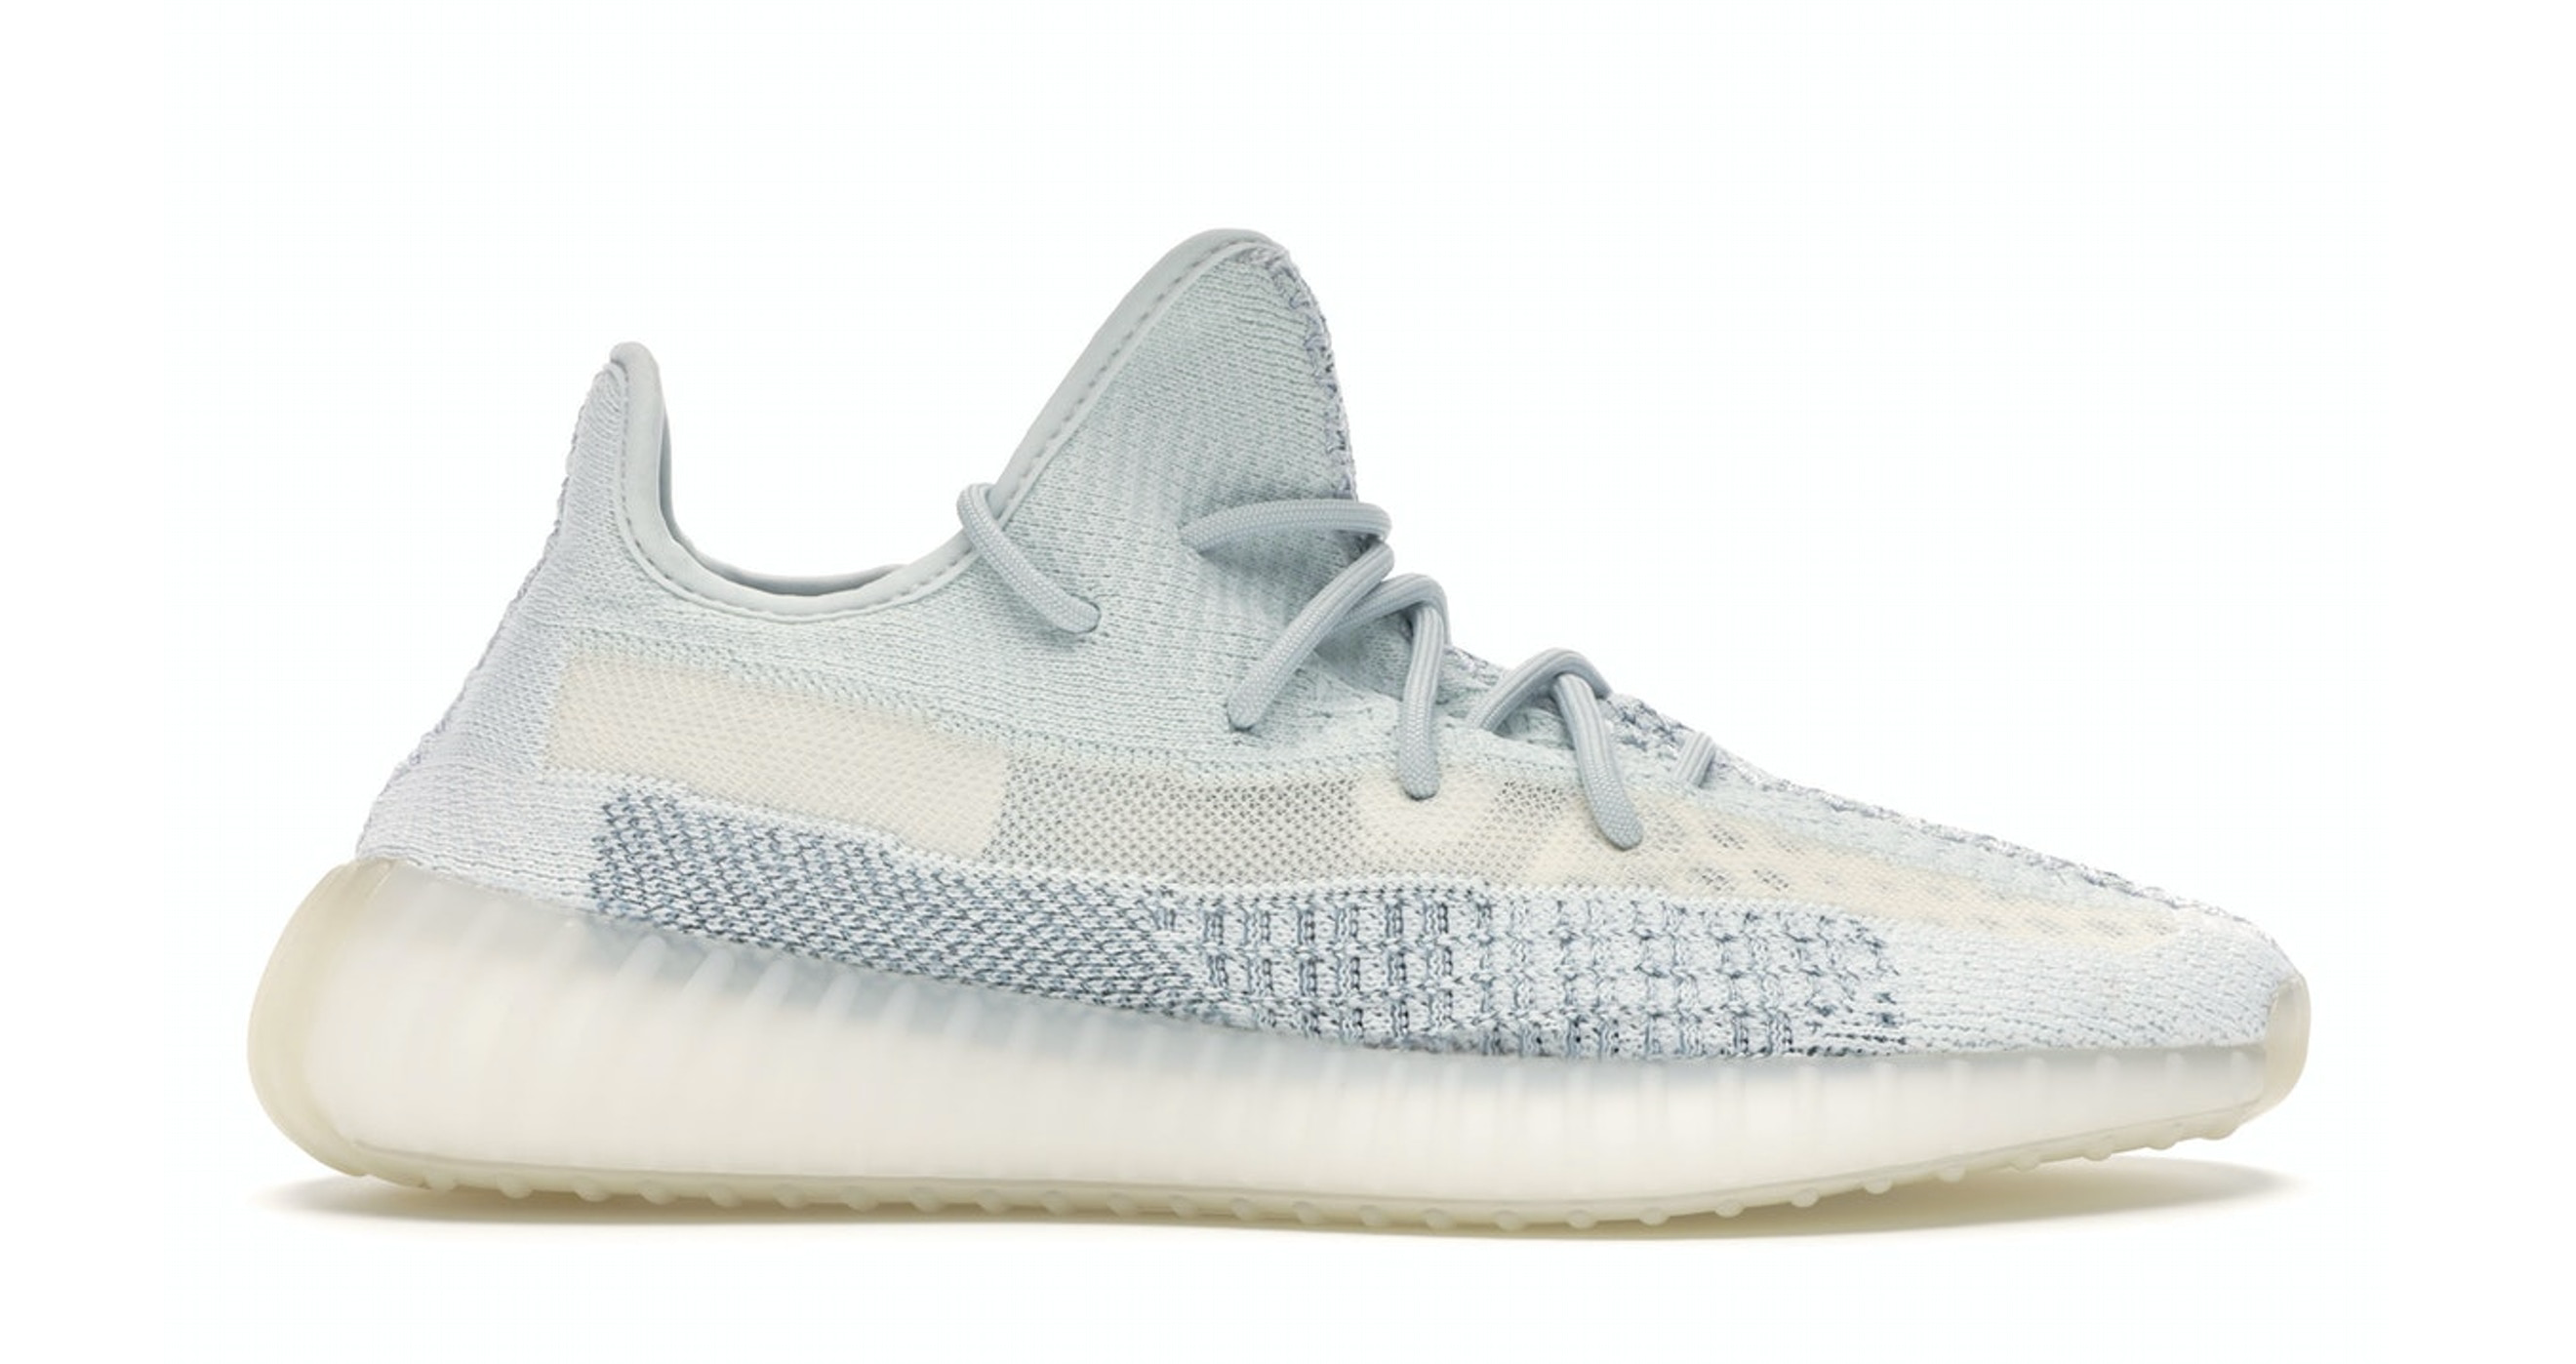 YEEZY BOOST 350 V2 CLOUD WHITE (REFLECTIVE) - The Edit LDN